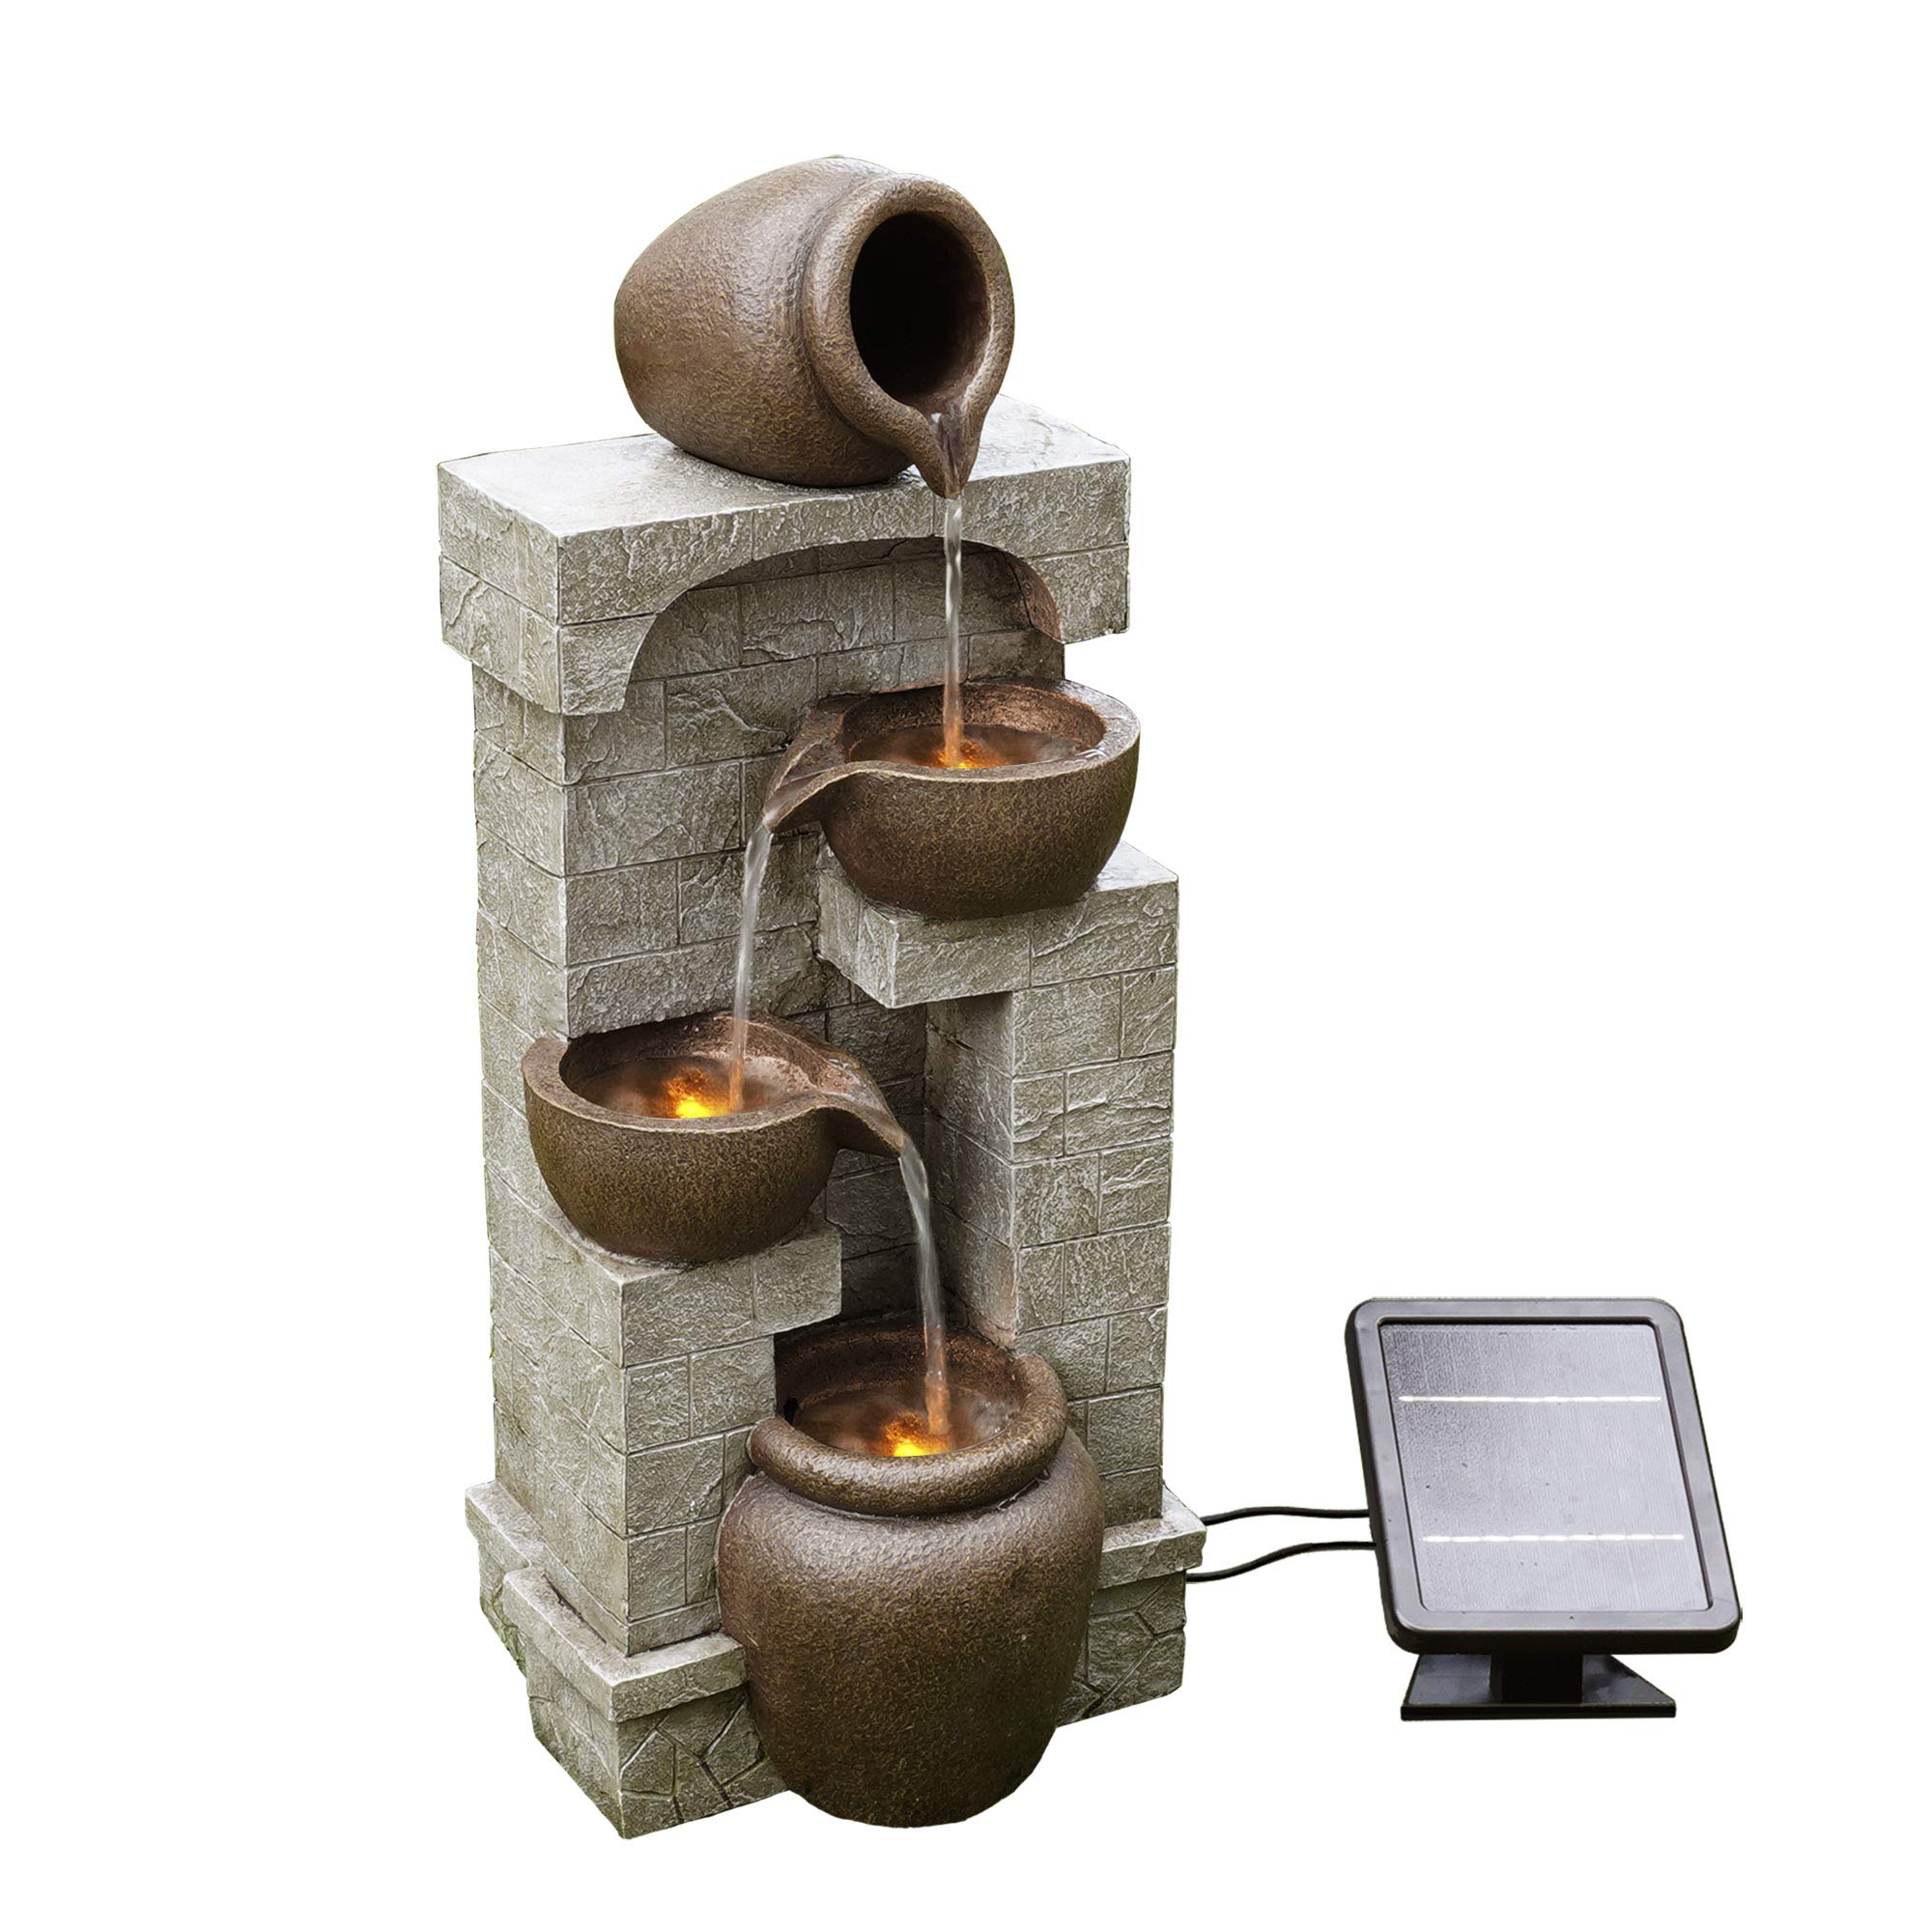 Peaktop Teamson Home 28 in cascading Bowls and Stacked Stones LED Outdoor Water Fountain for Outdoor Living Spaces to create a calming O